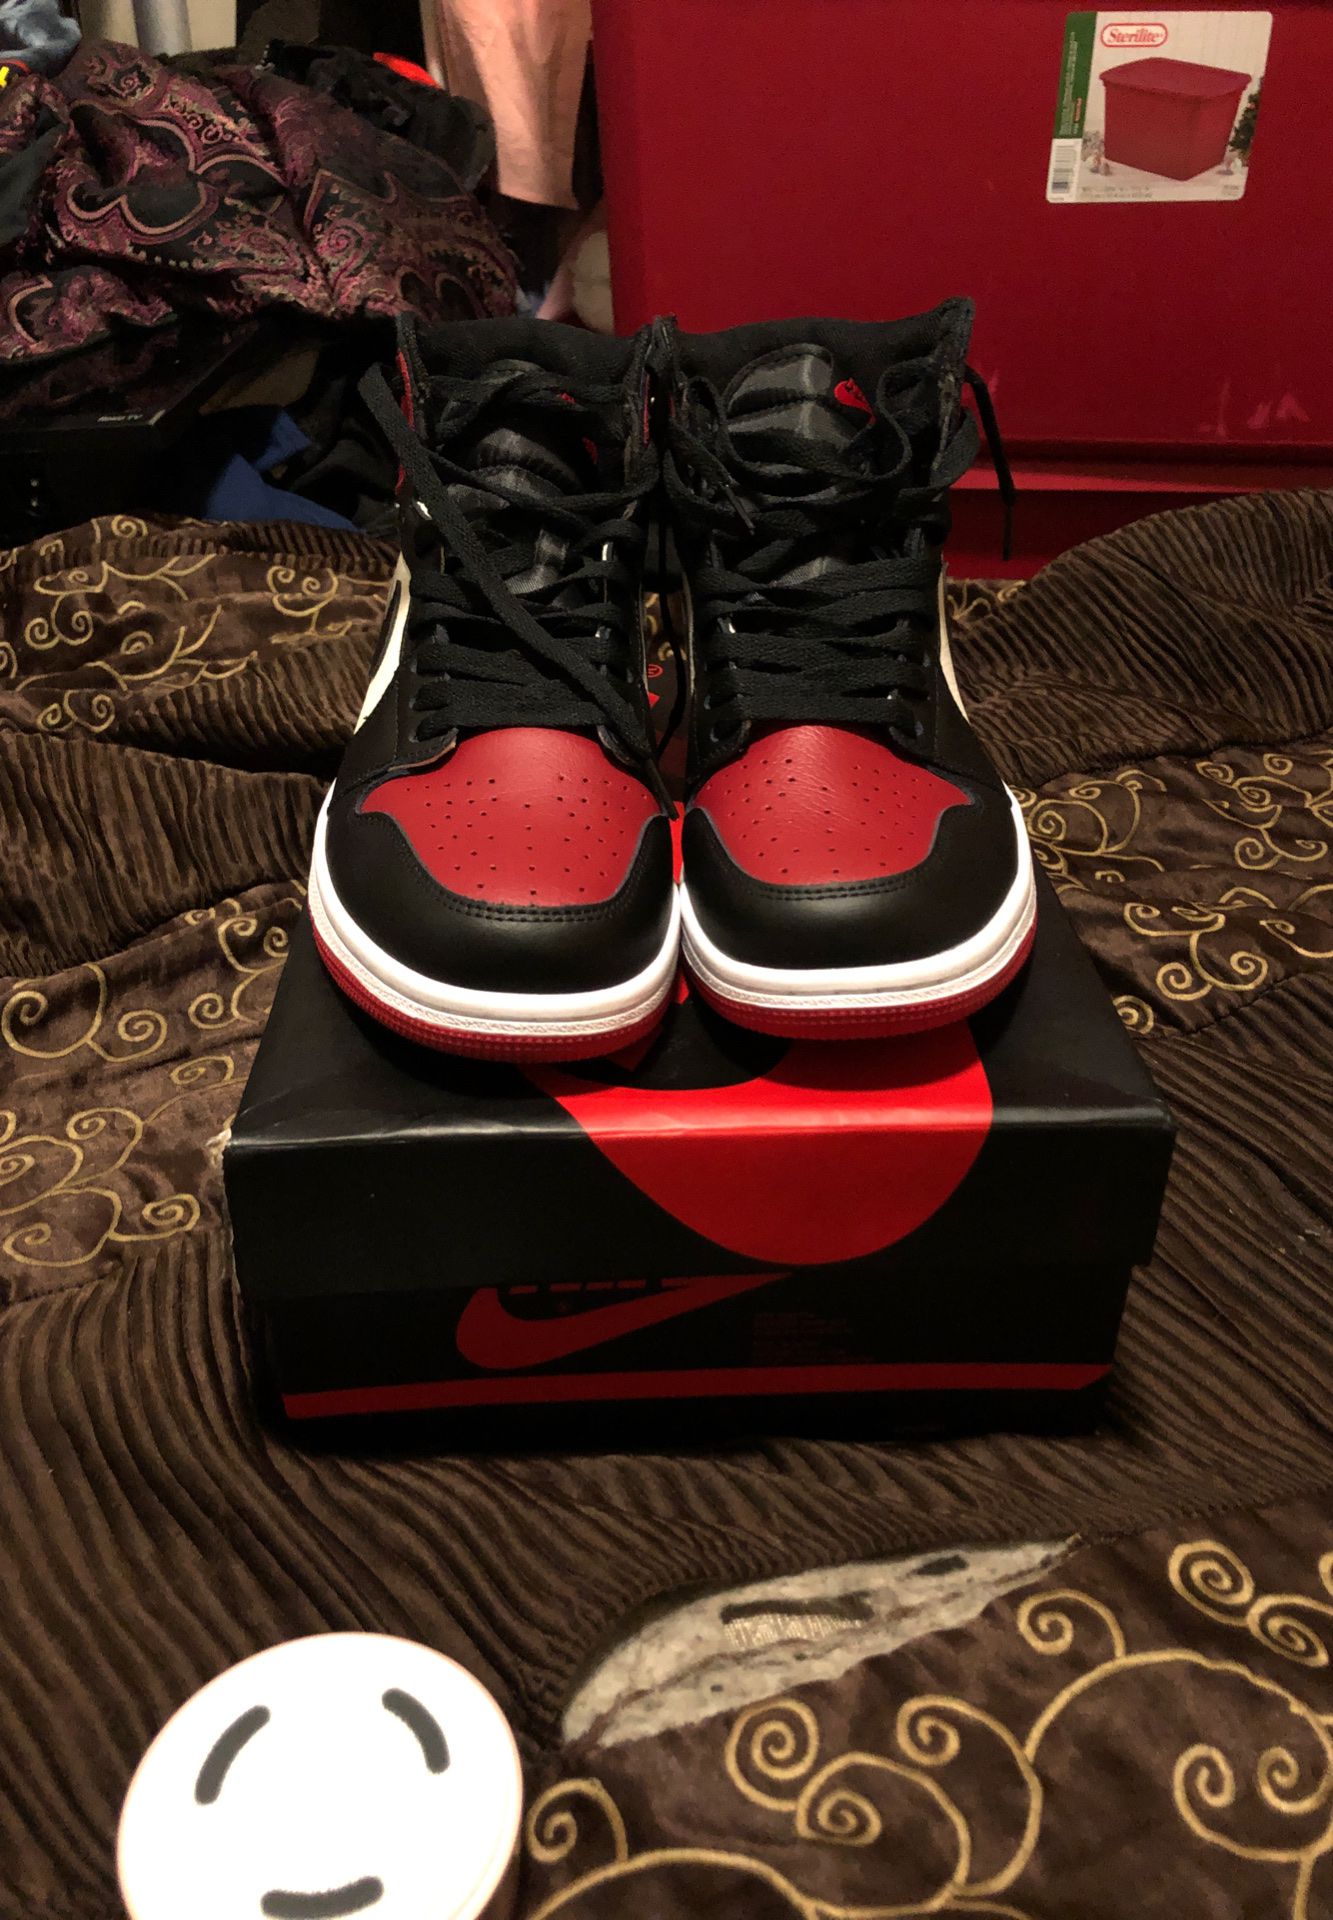 Bred toe ones